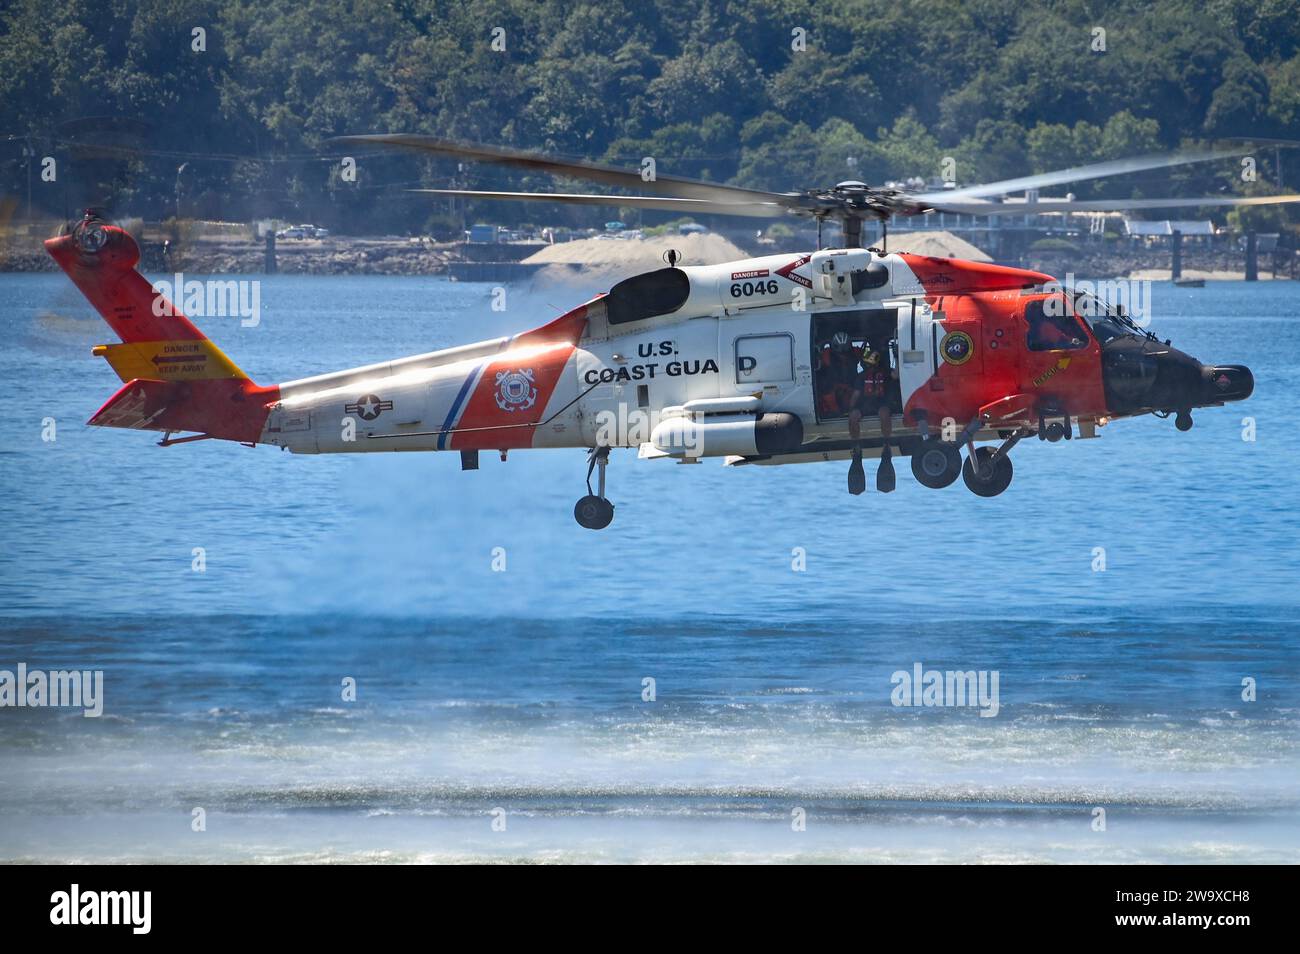 A Coast Guard MH-60 Jayhawk helicopter from Air Station Astoria hovers above the water near Seattle, Wash., Aug. 1, 2023. The demonstration was part of the Parade of Ships for the annual Seafair festival. (U.S. Coast Guard photo by Petty Officer Steve Strohmaier) Stock Photo